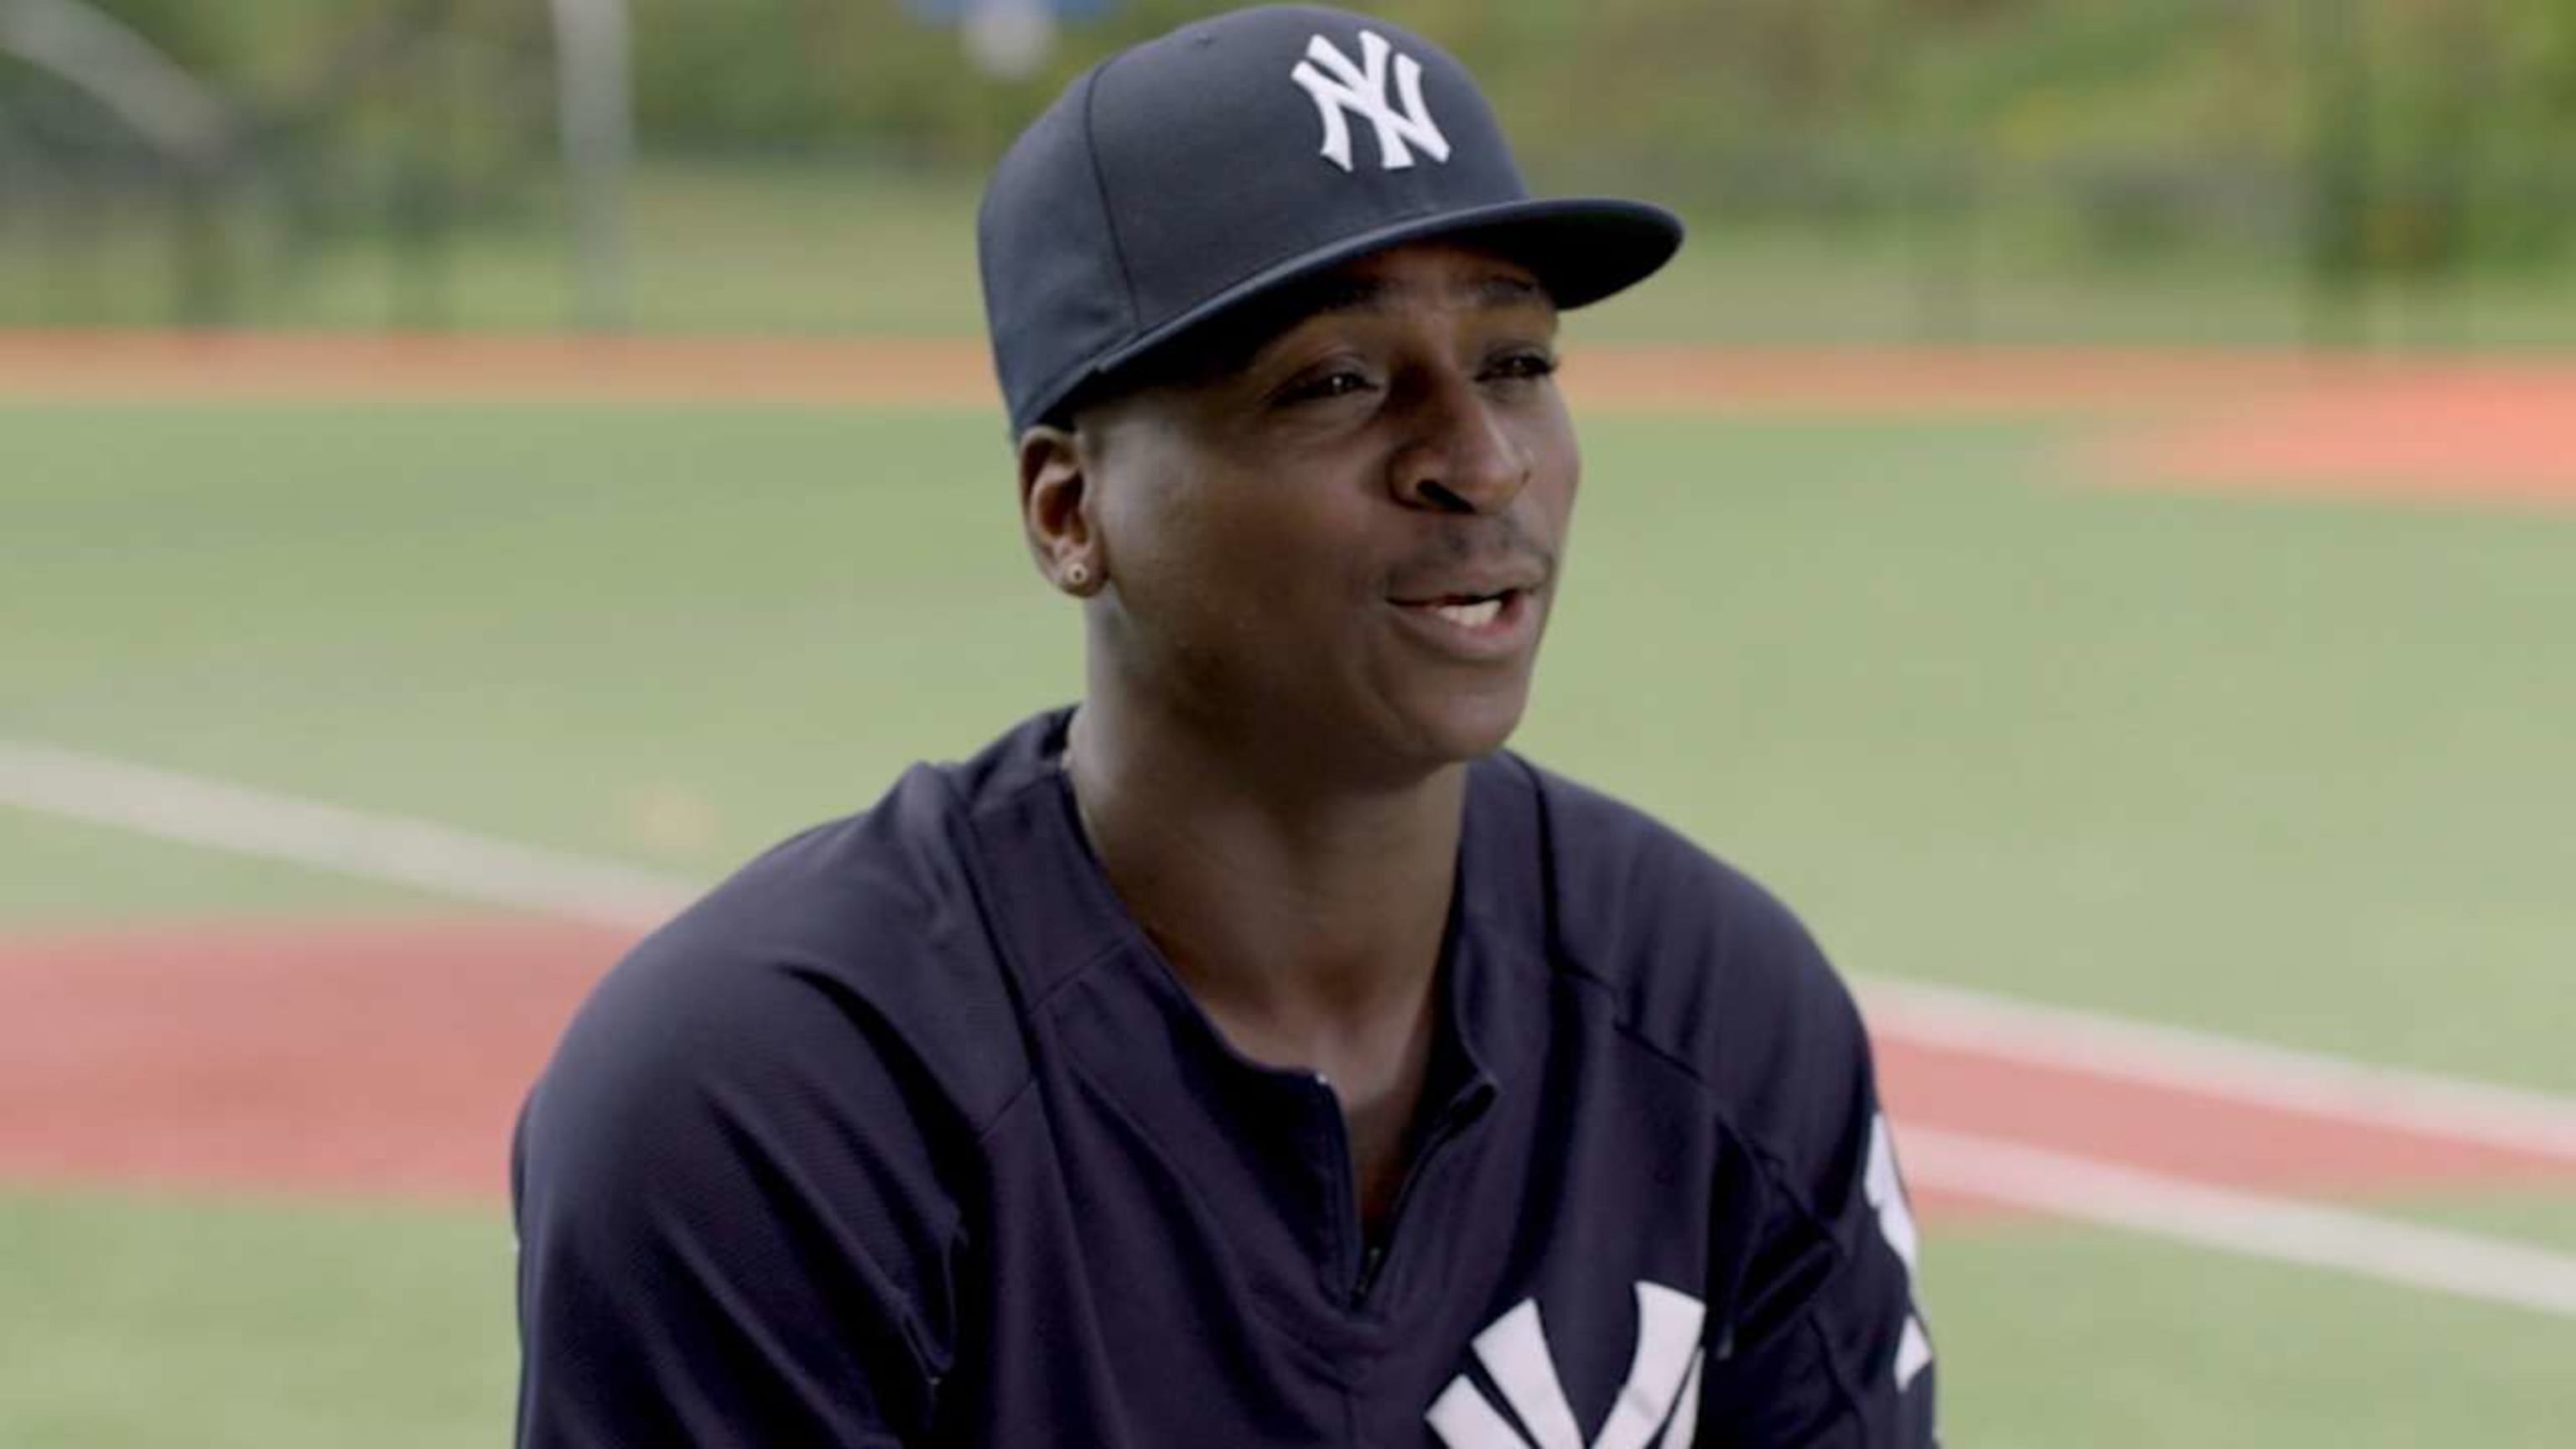 Yankees' aftermath after Didi Gregorius signs with Phillies